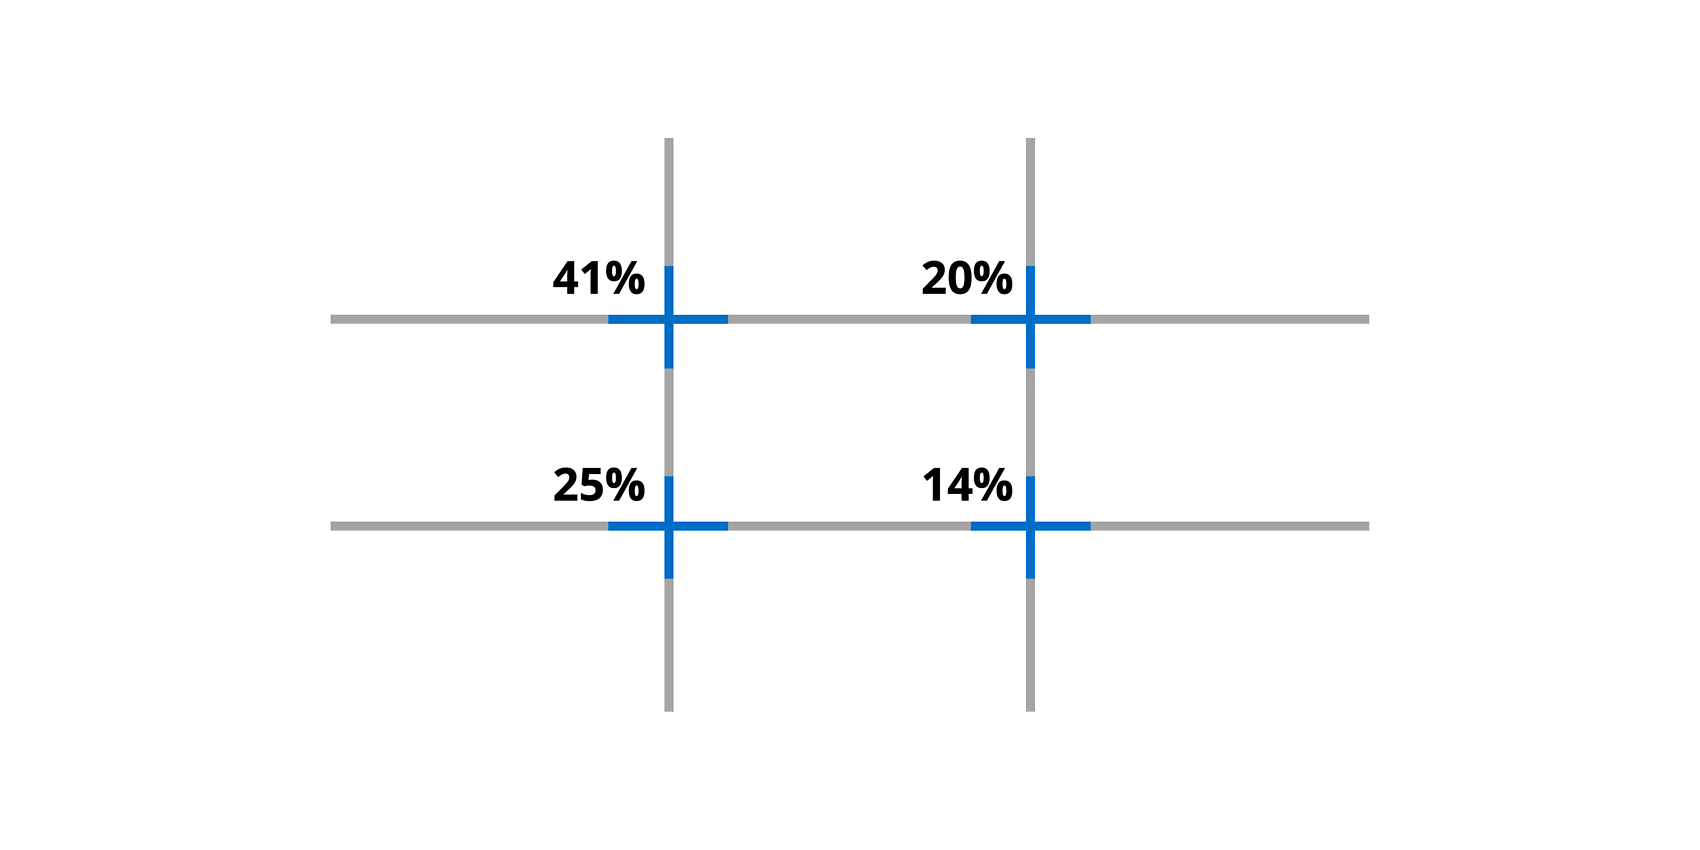 Rule of thirds: These are the layout sweet spots with their respective percentages of our attention